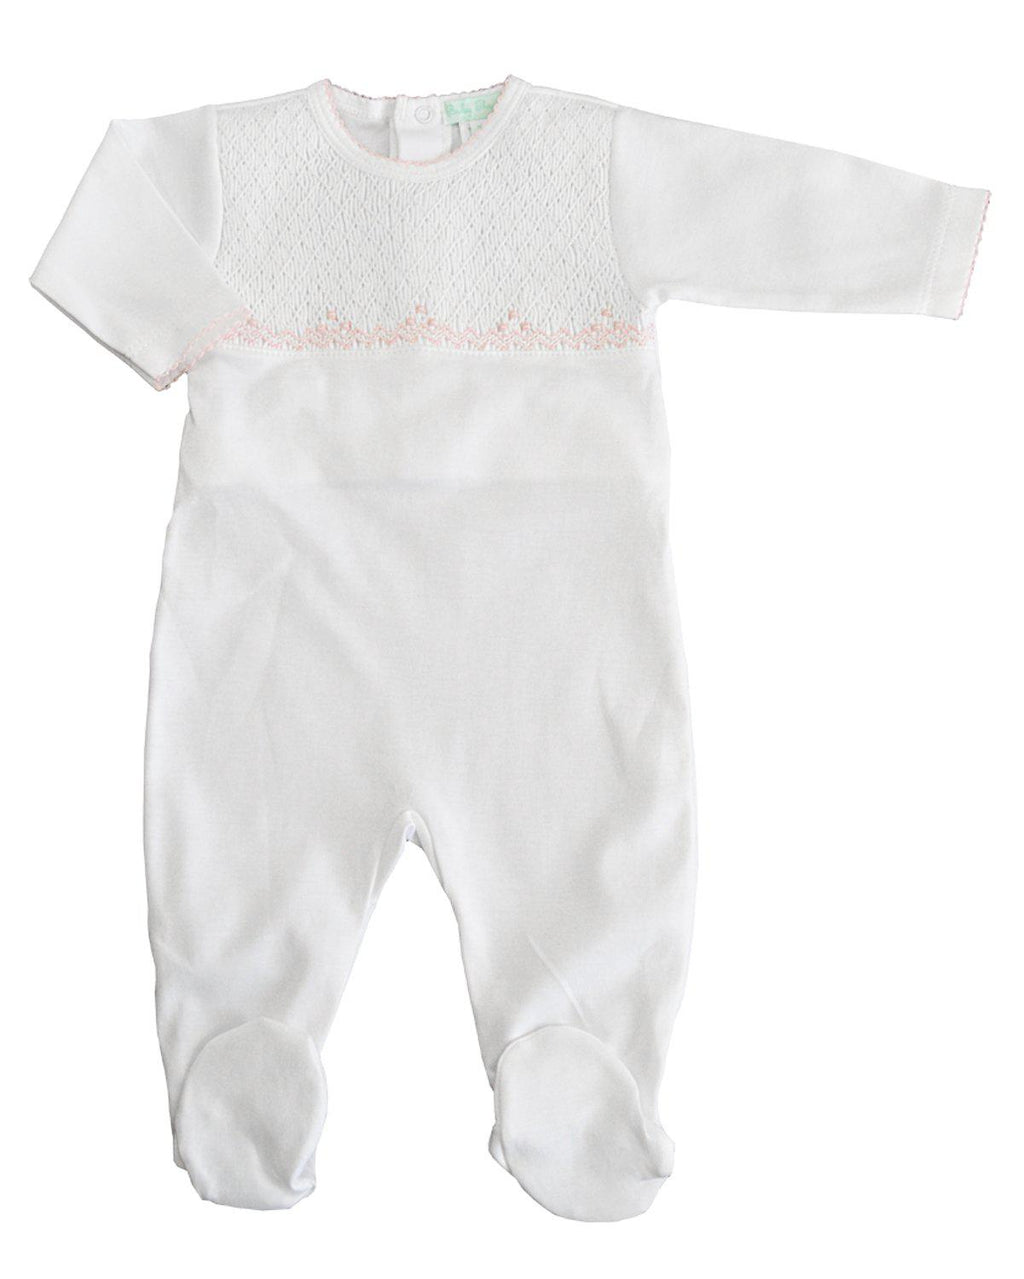 White Full Smocked Footie with pink trim - Little Threads Inc. Children's Clothing